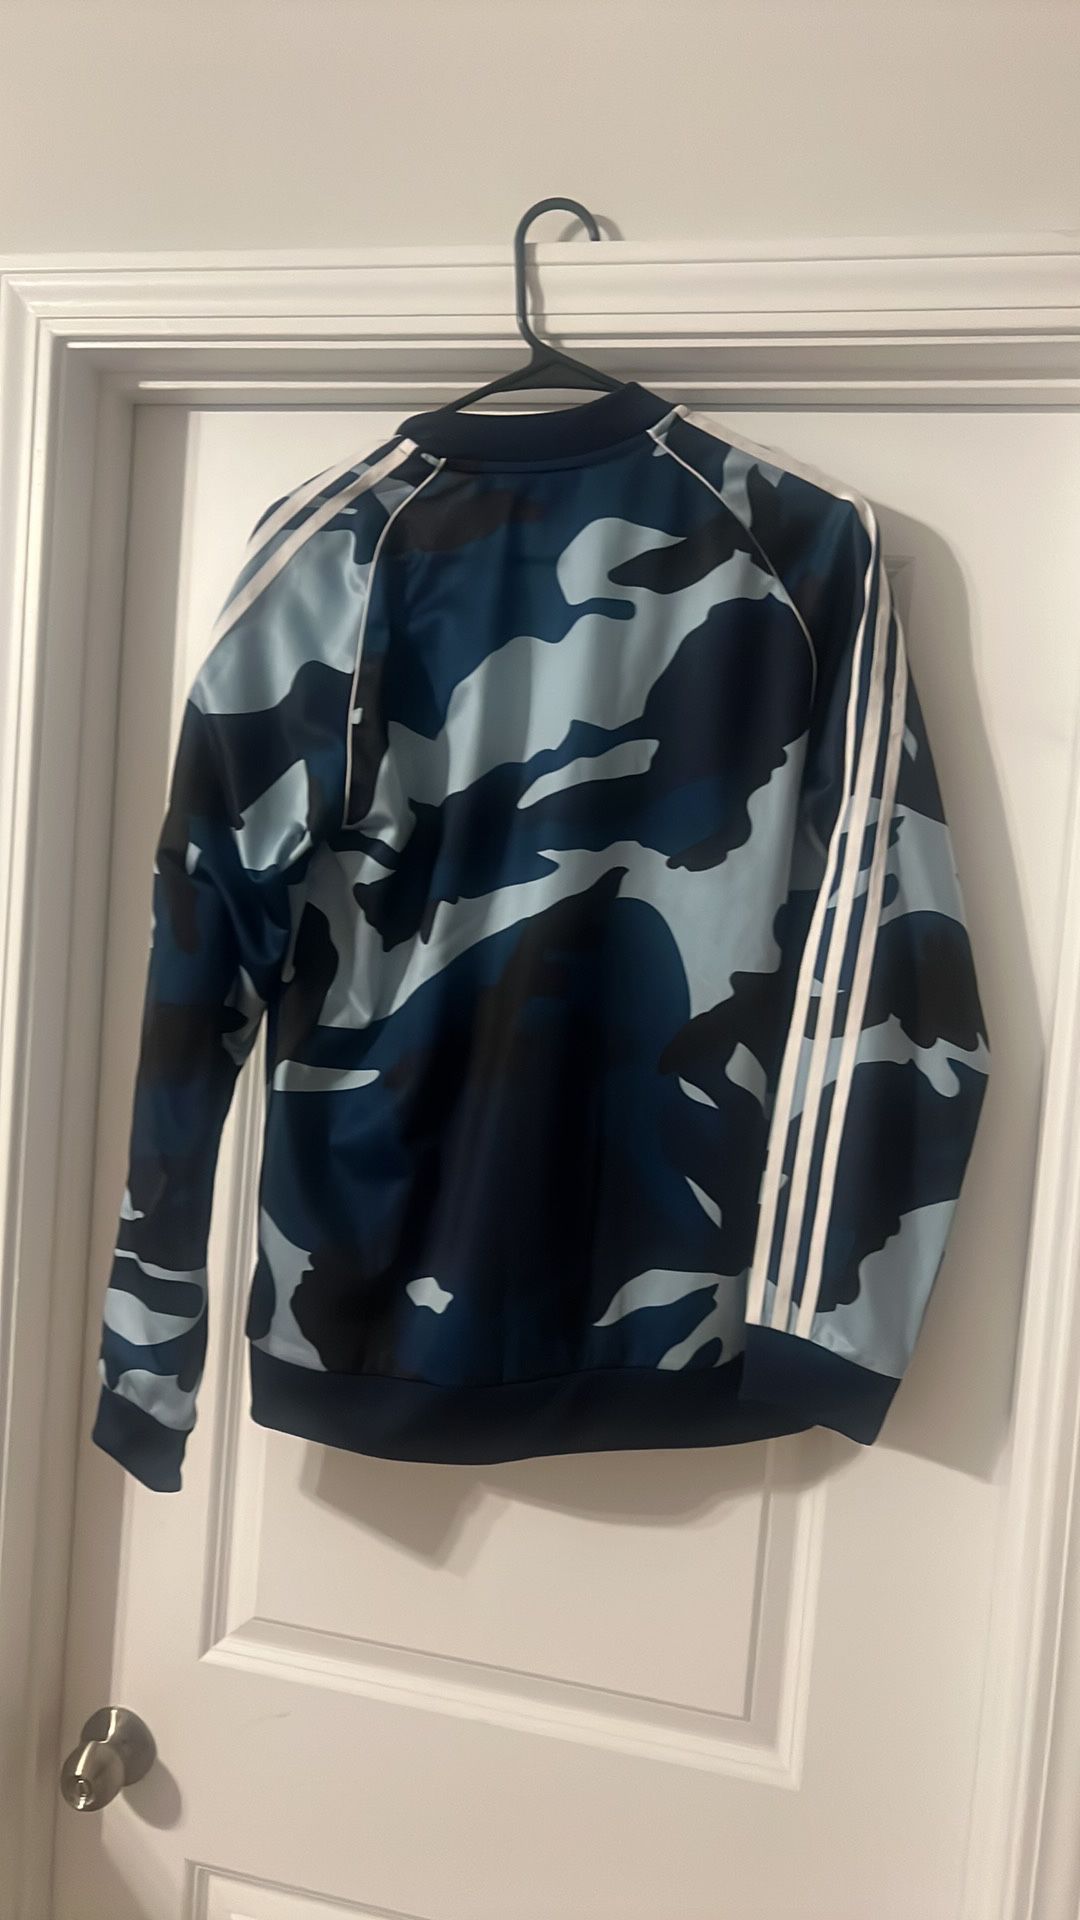 SOLD Adidas camouflage jacket SOLD 